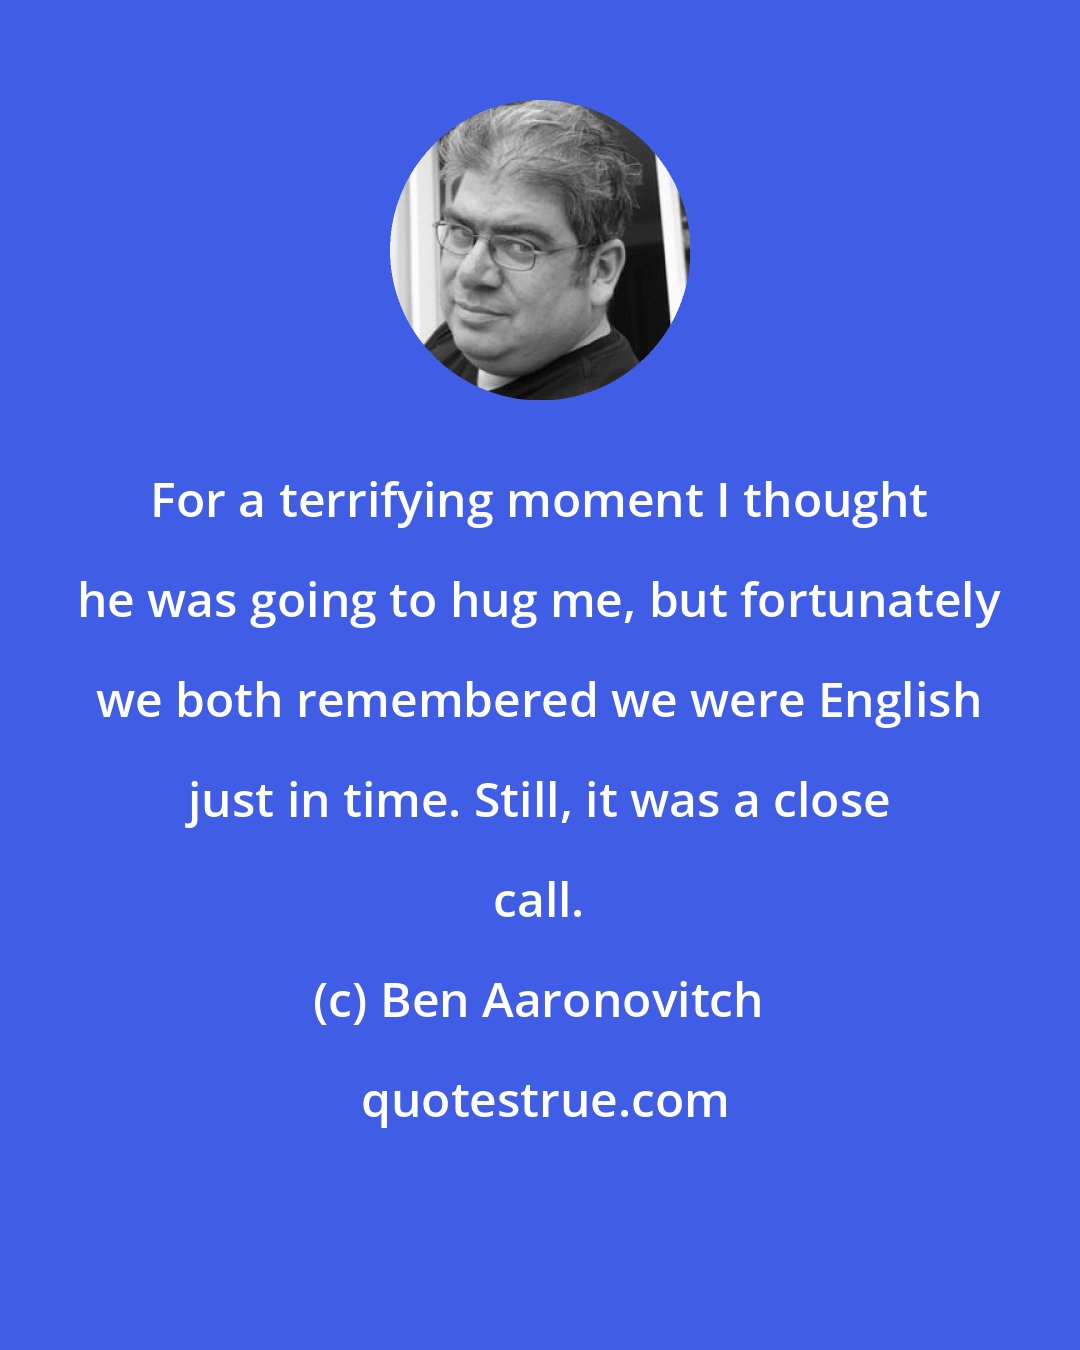 Ben Aaronovitch: For a terrifying moment I thought he was going to hug me, but fortunately we both remembered we were English just in time. Still, it was a close call.